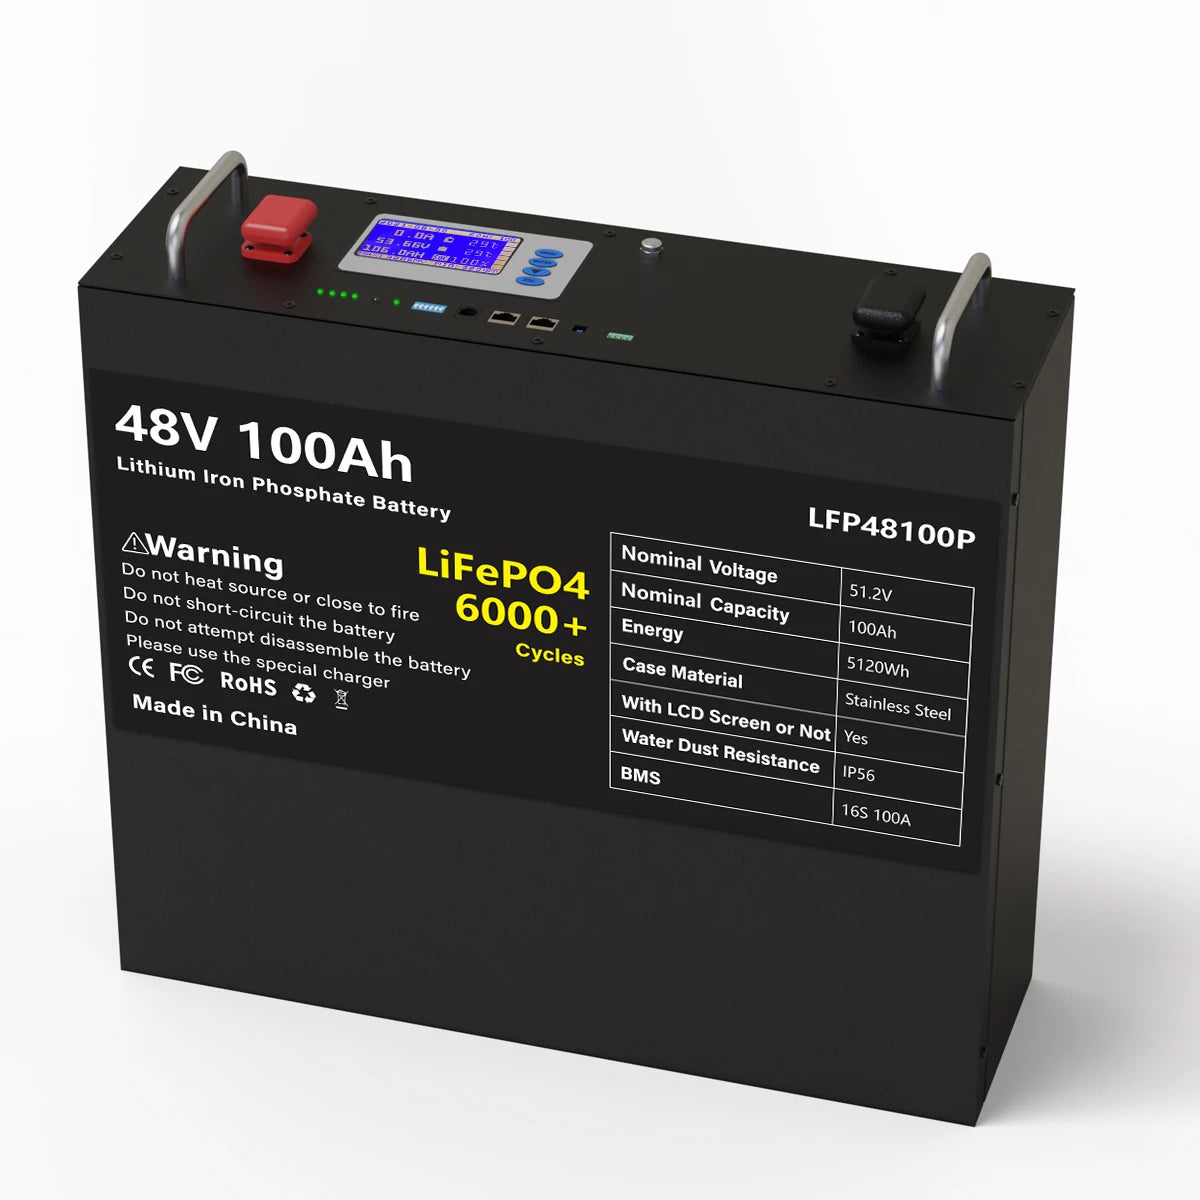 48V 100AH 200AH LiFePO4 Battery, High-performance LiFePO4 lithium-ion battery with 48V nominal voltage and durable design for off-grid and on-grid applications.